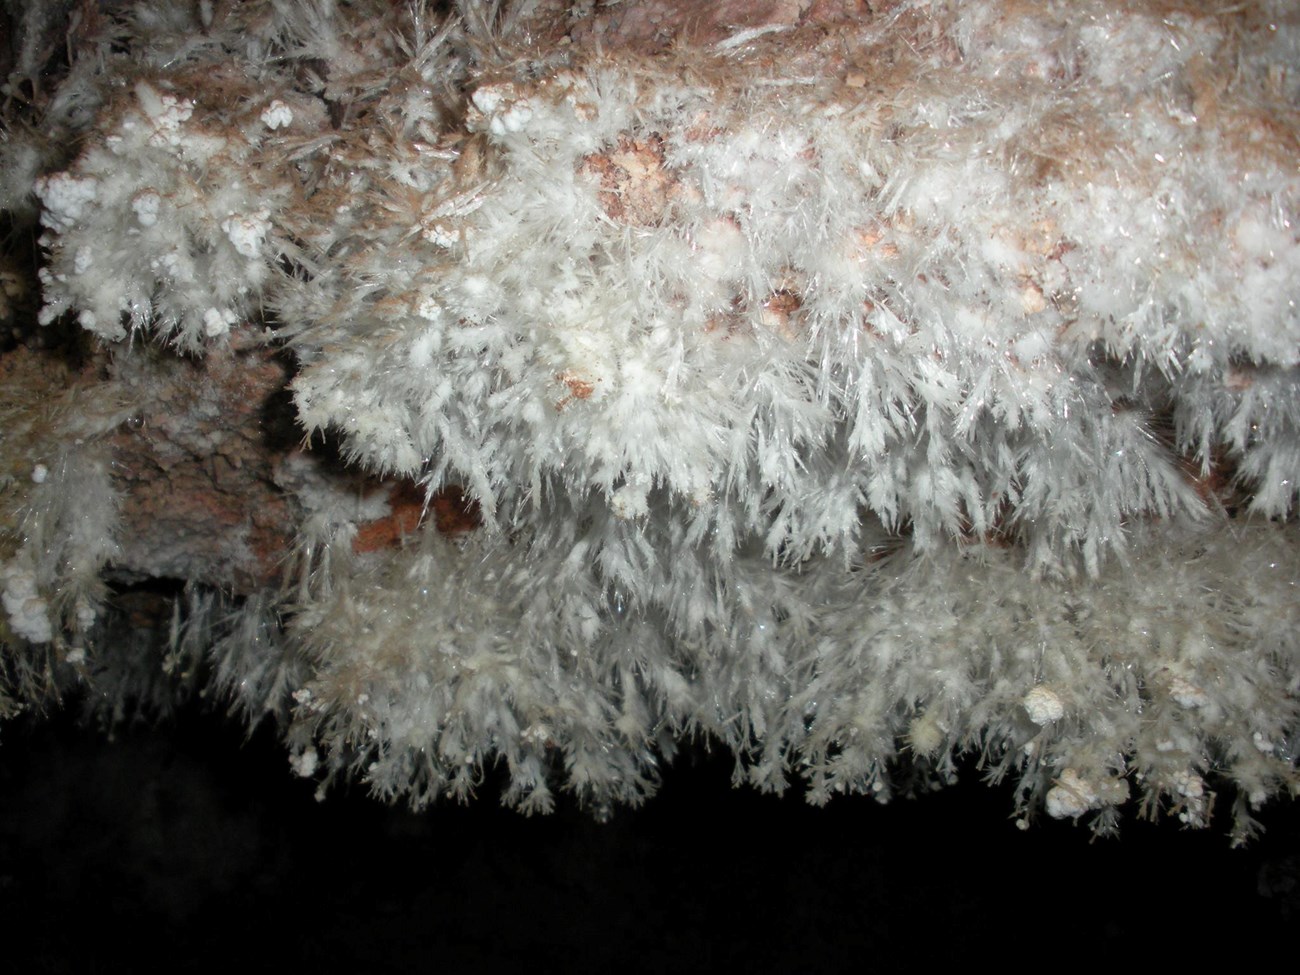 feathery mineral formations on the ceiling of a cave